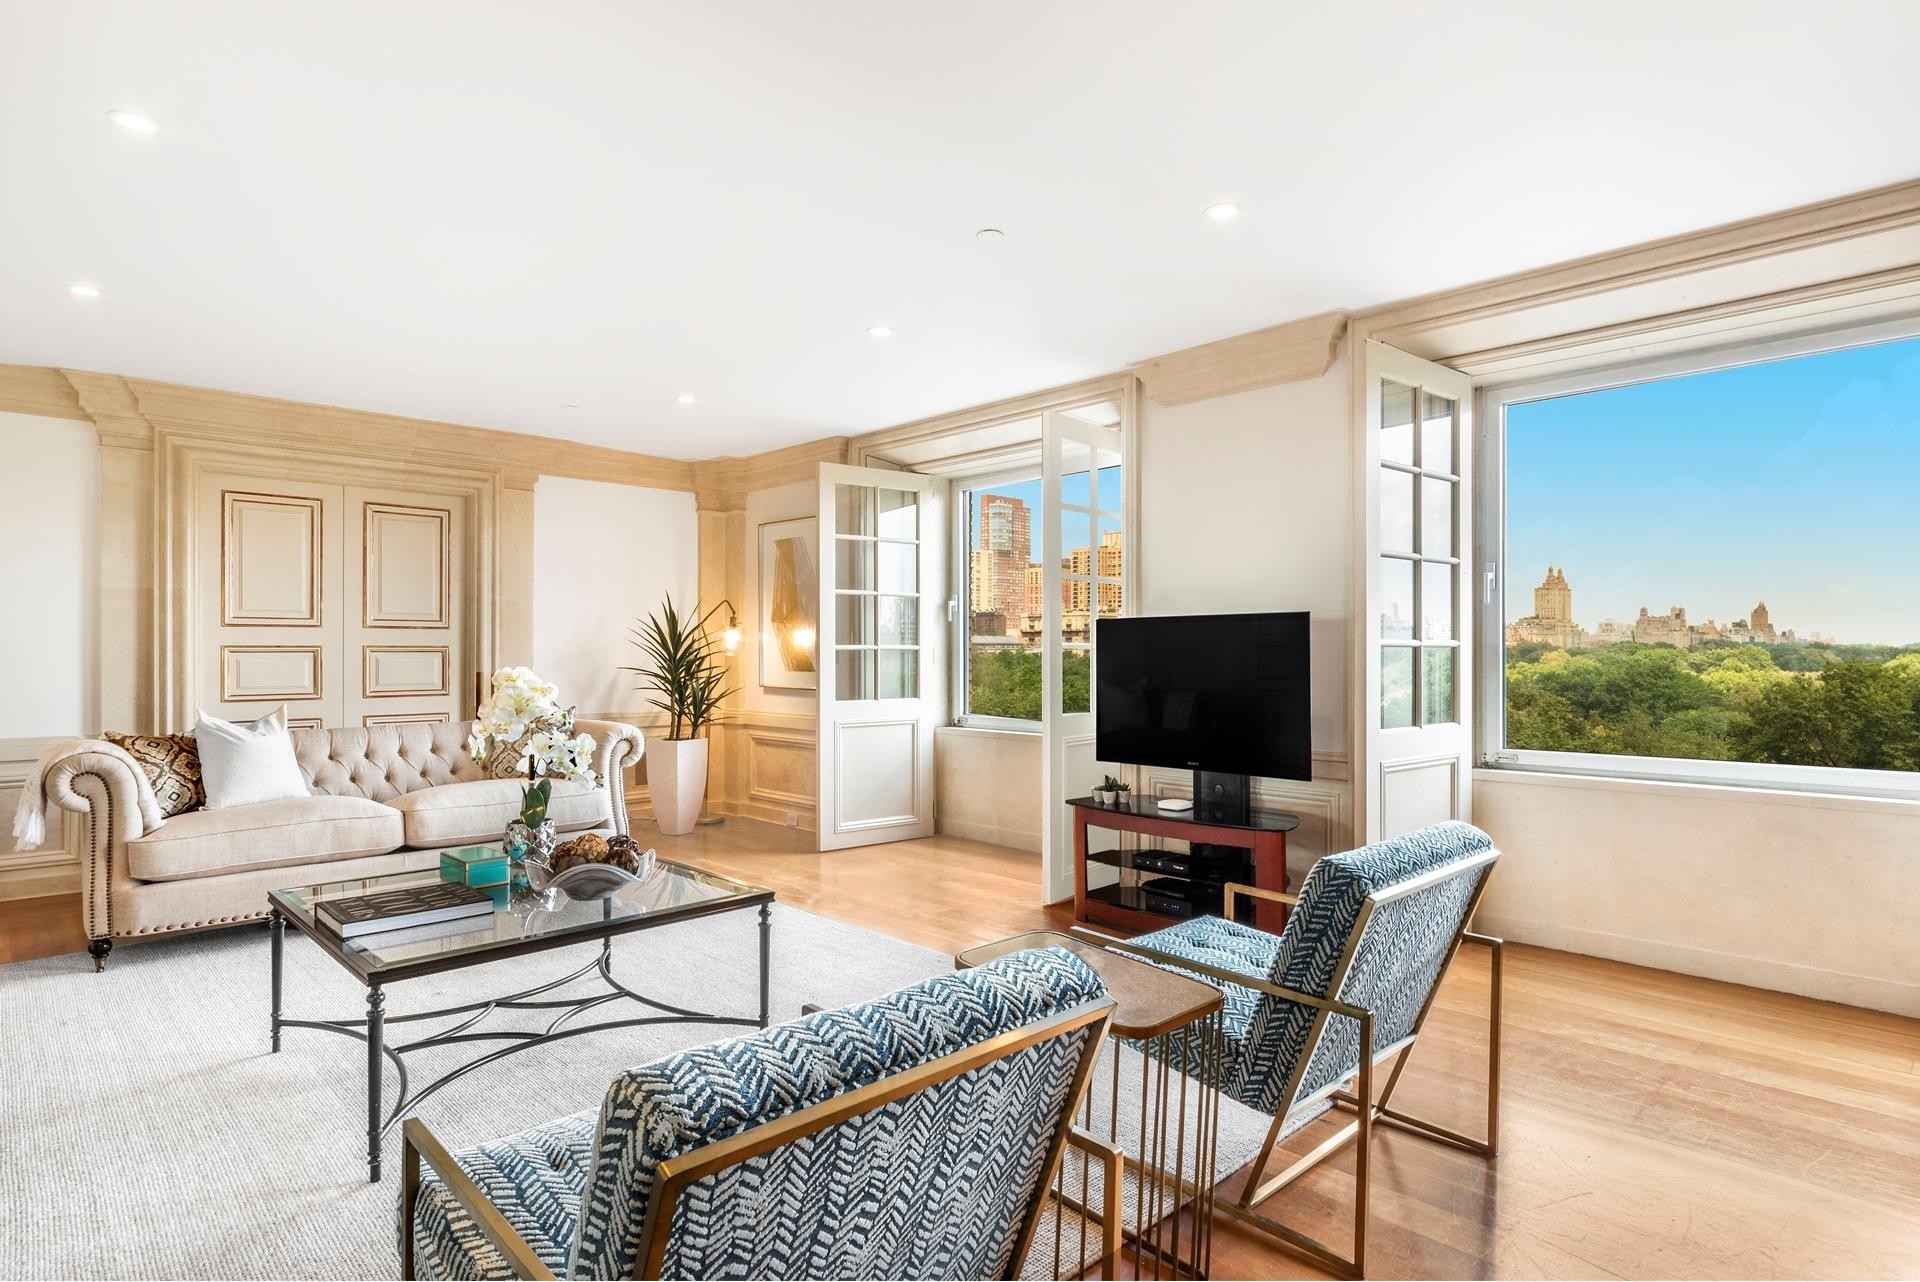 Property at Essex House, 160 CENTRAL PARK S, 915 New York